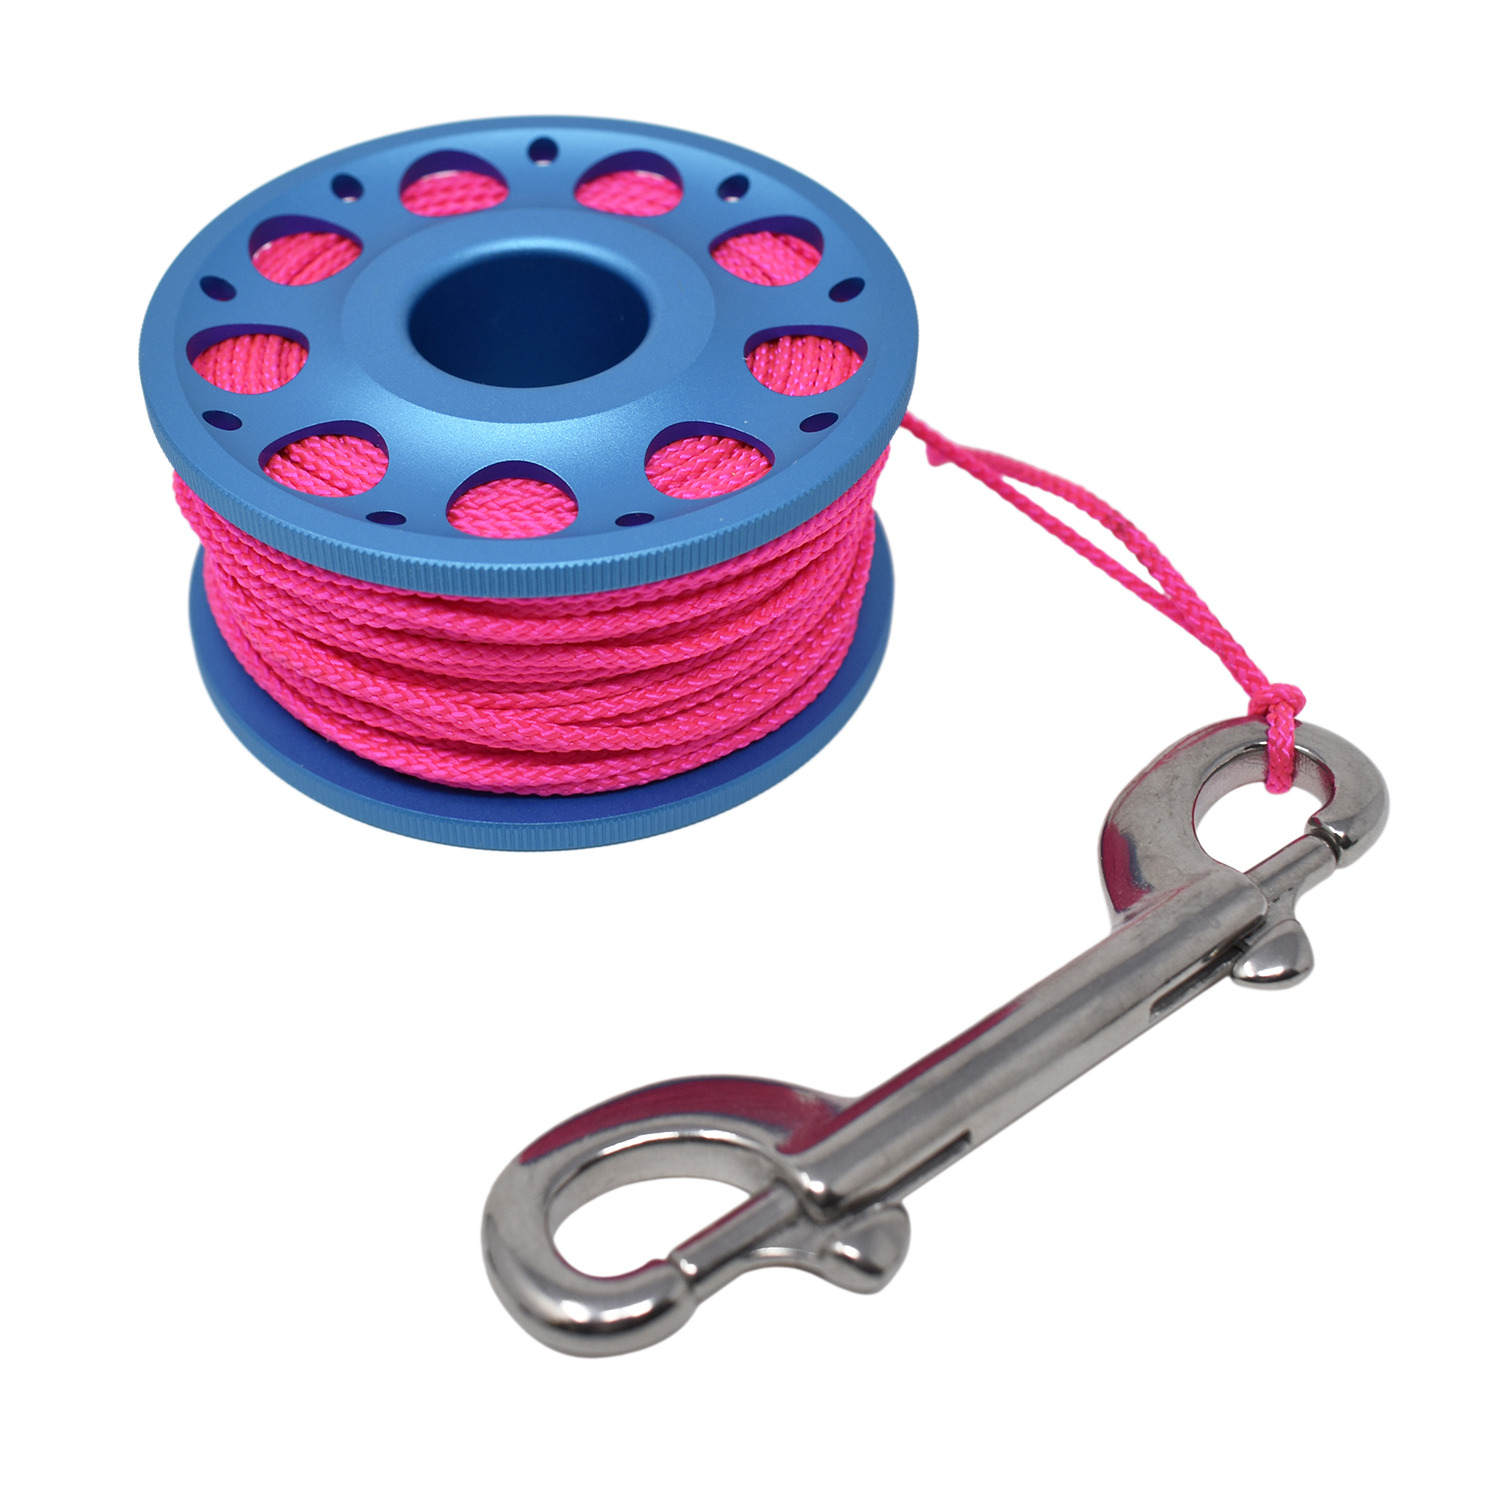 Aluminum Finger Spool 100ft Dive Reel w/ Retractable Holder, Baby Blue/Pink - image 3 of 4